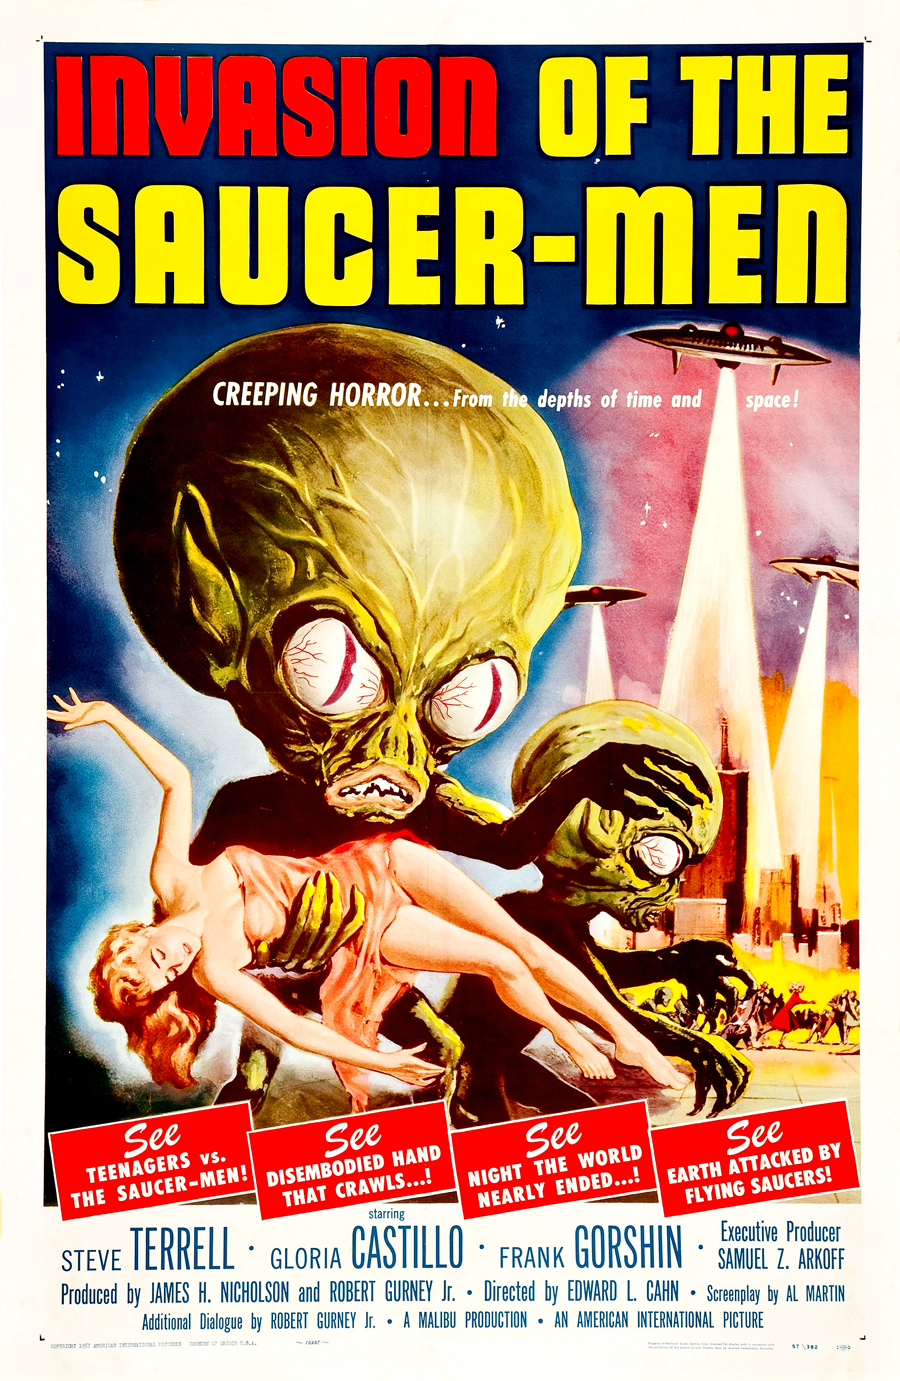 Where Danger Lives: 50 GREATEST CLASSIC SCI-FI POSTER COUNTDOWN! 20-11